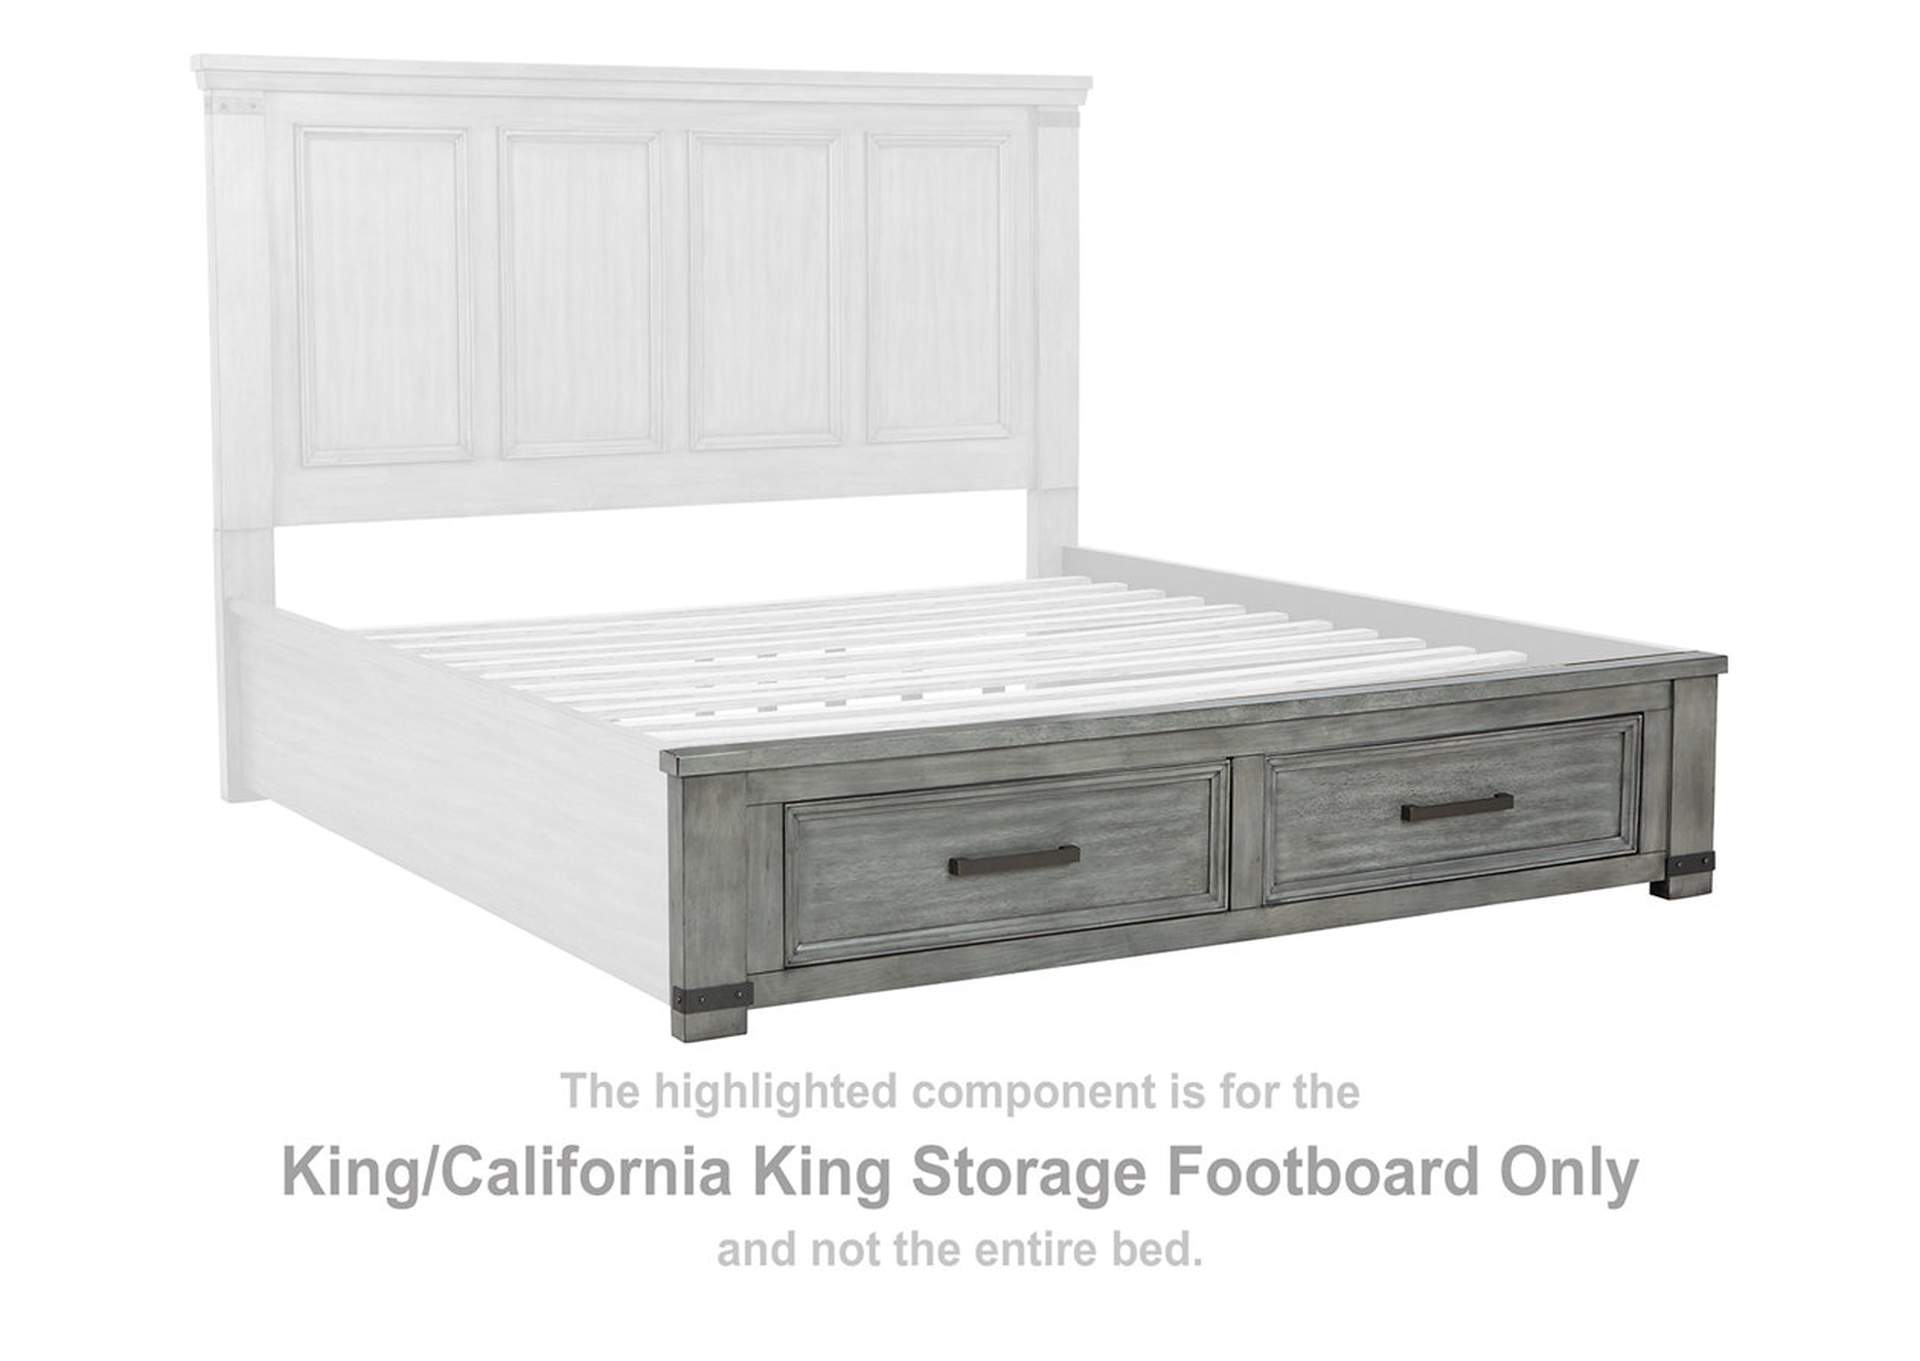 Russelyn California King Storage Bed,Signature Design By Ashley